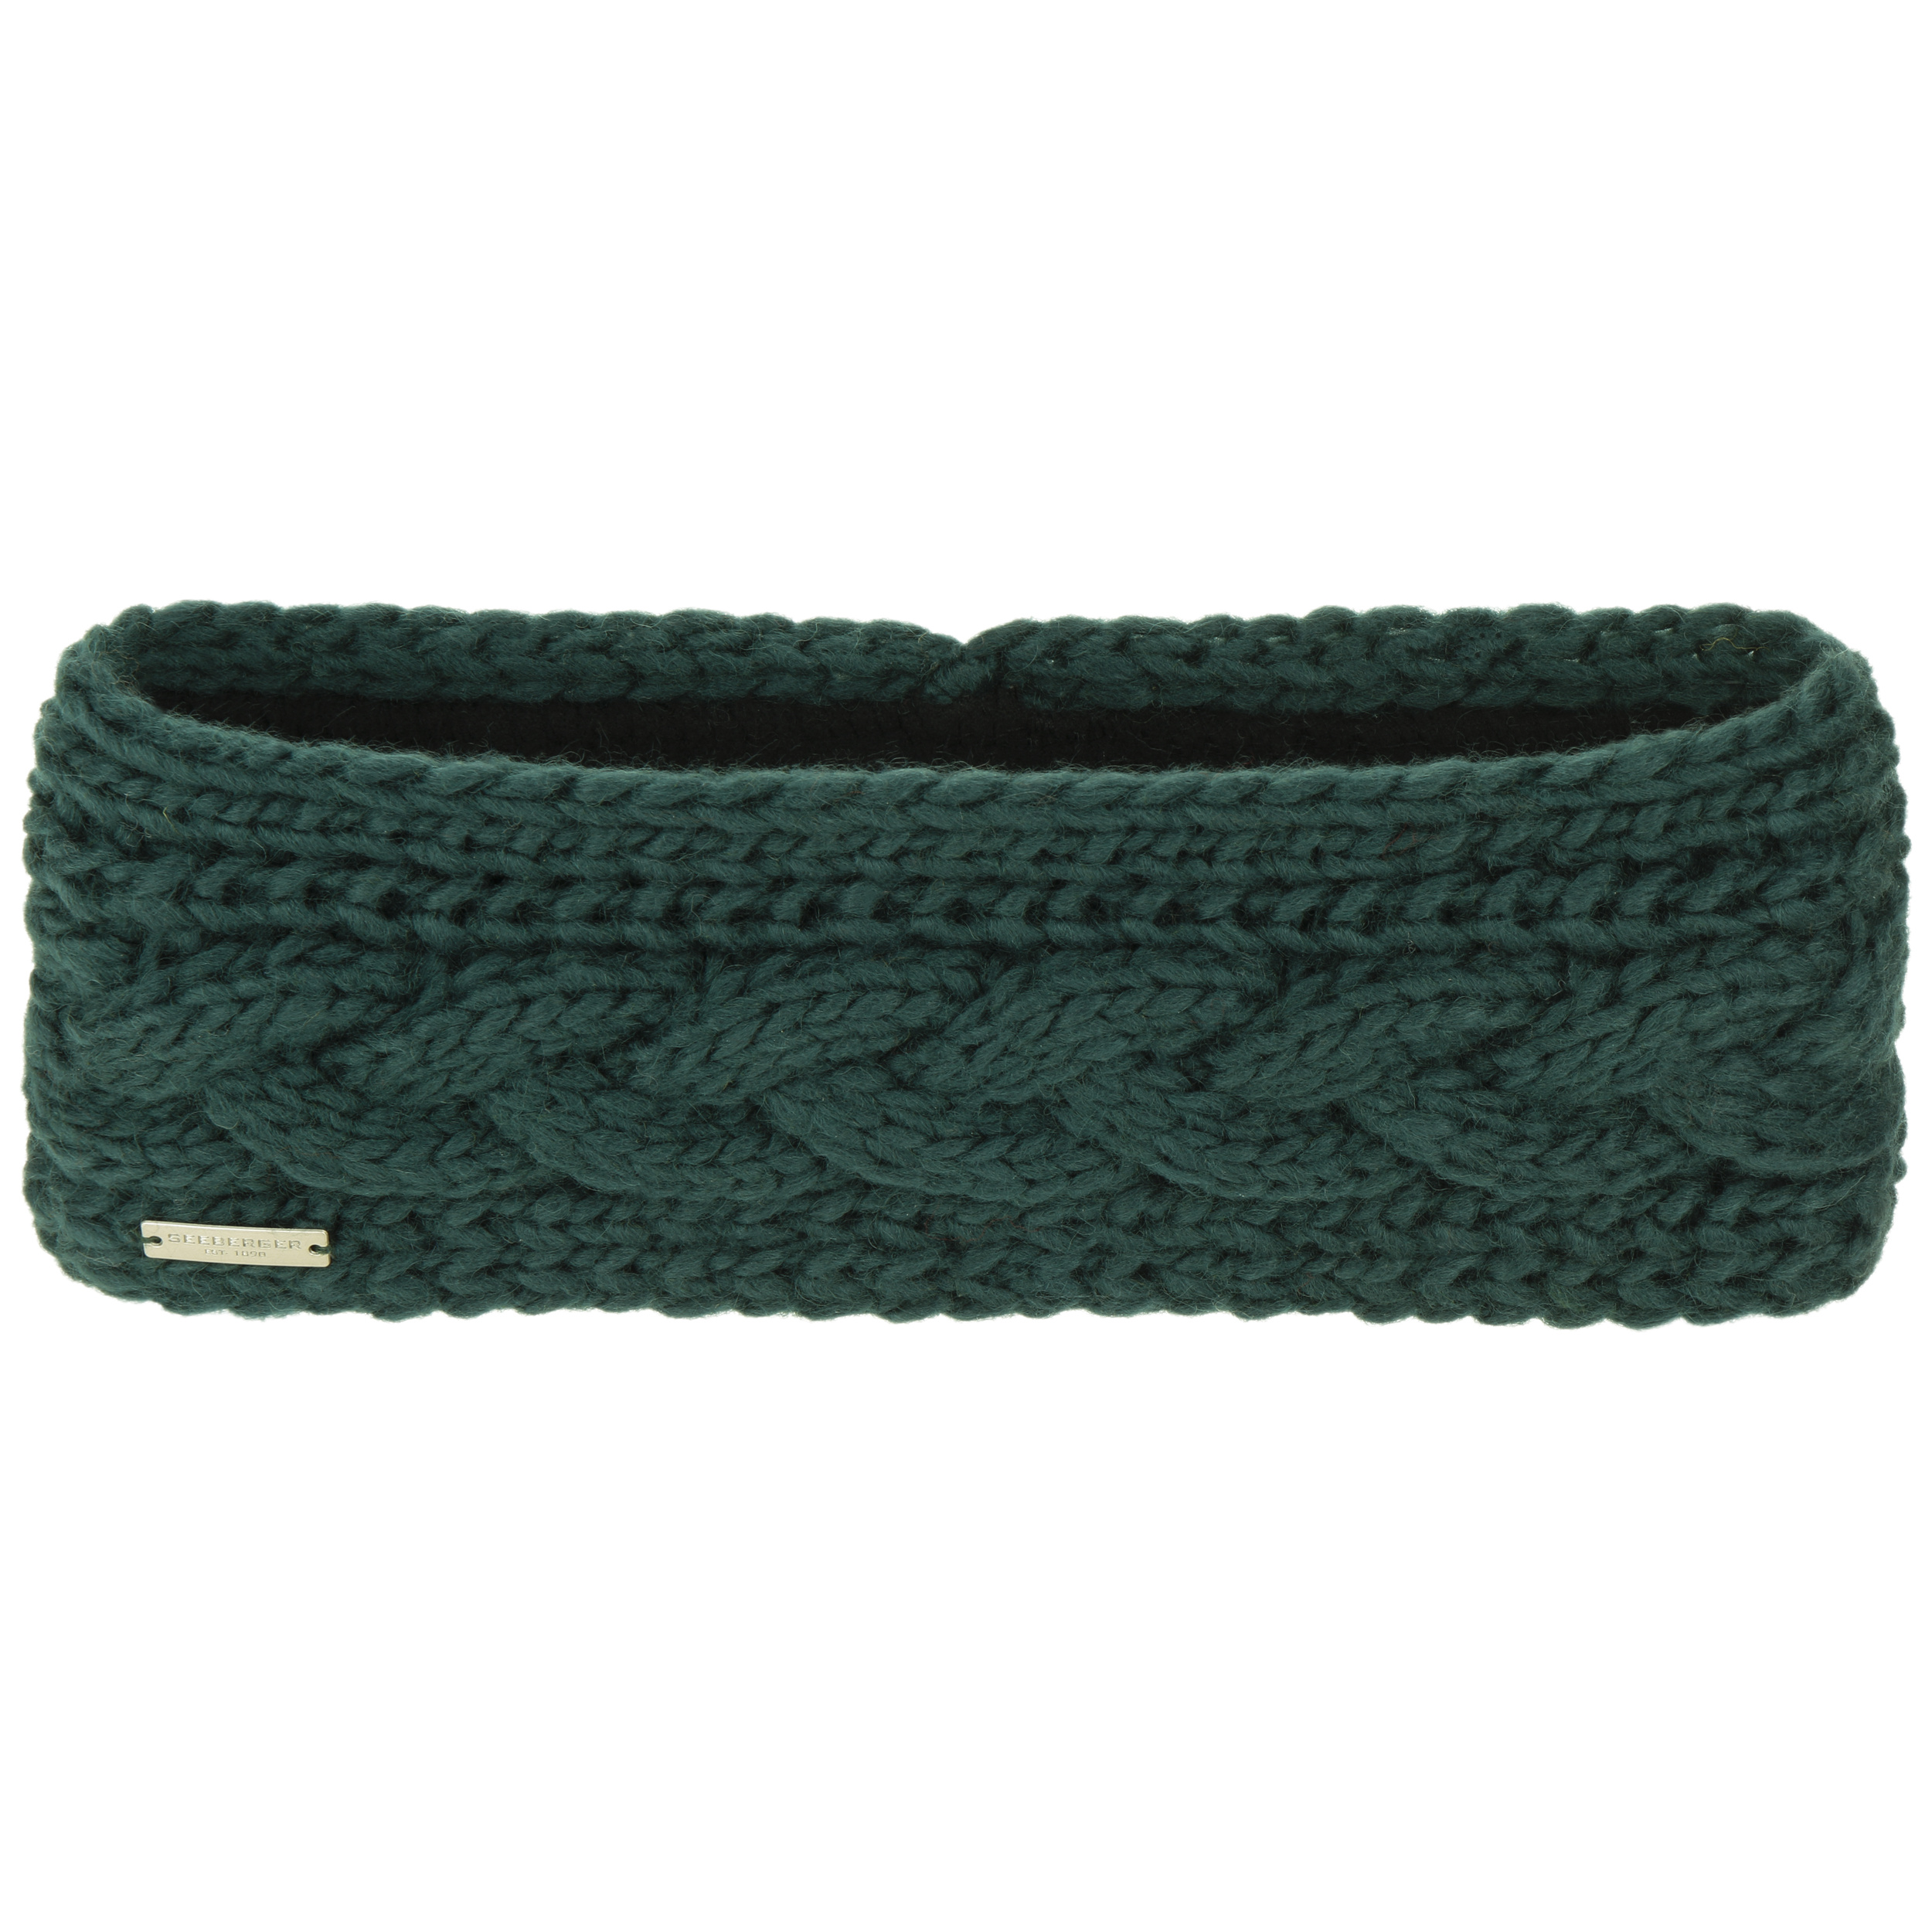 Classic Cable Knit Stirnband by Seeberger 19,95 - €